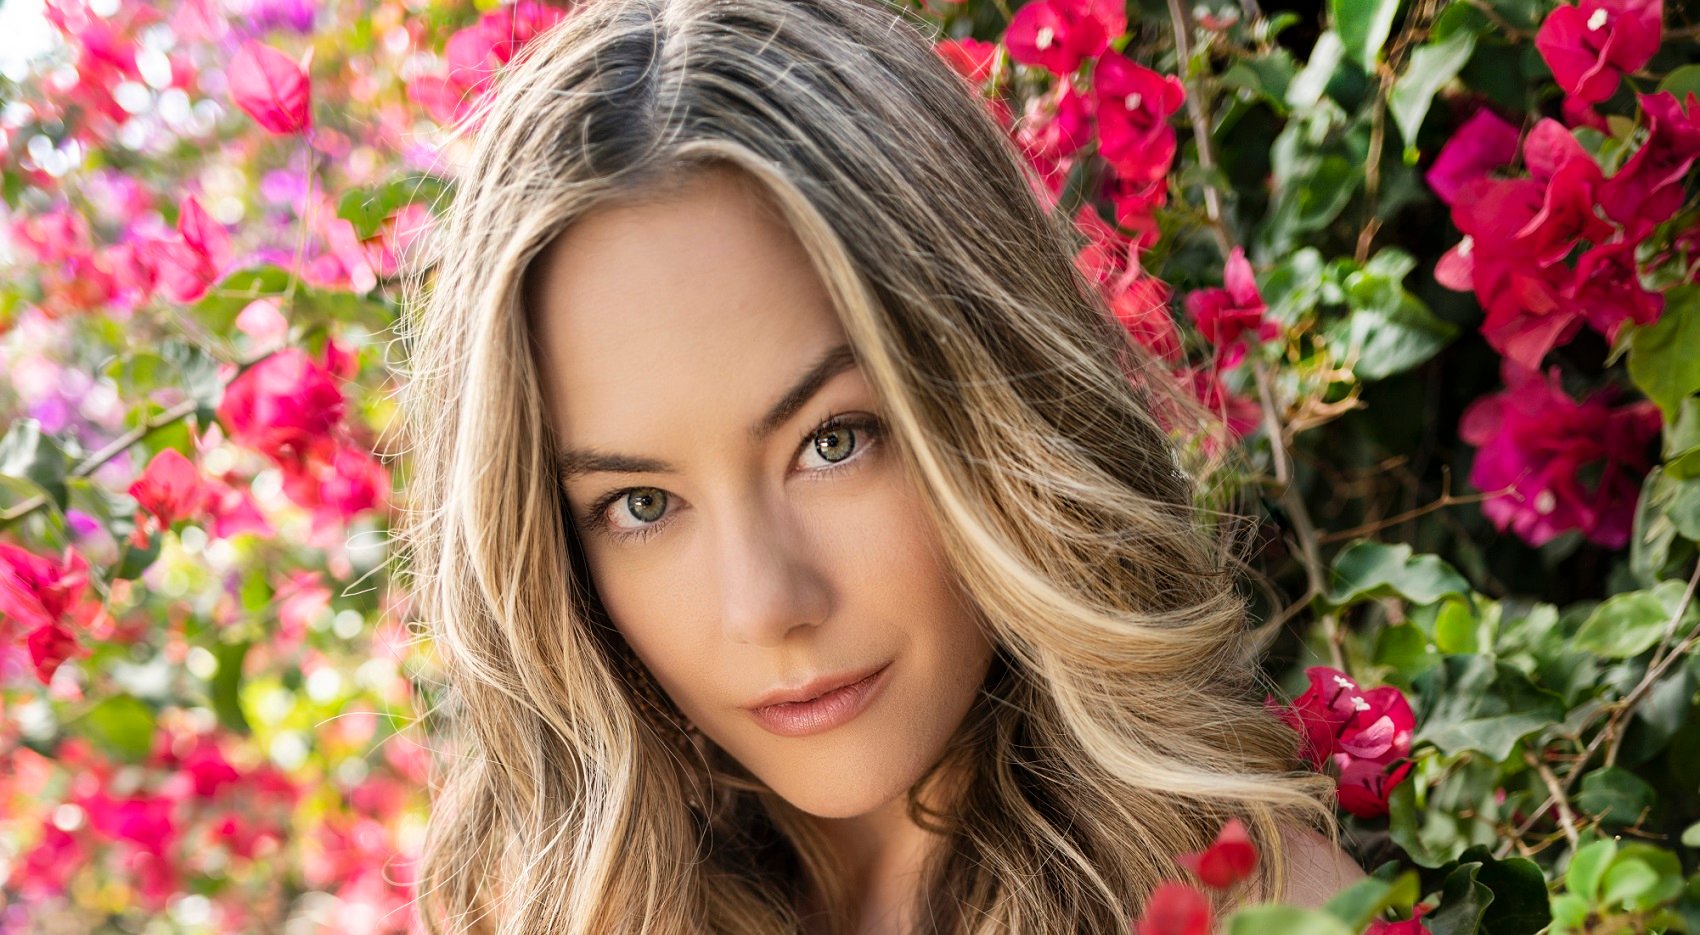 The Bold and the Beautiful speculation focuses on Hope, pictured here in a headshot against red and green flowers